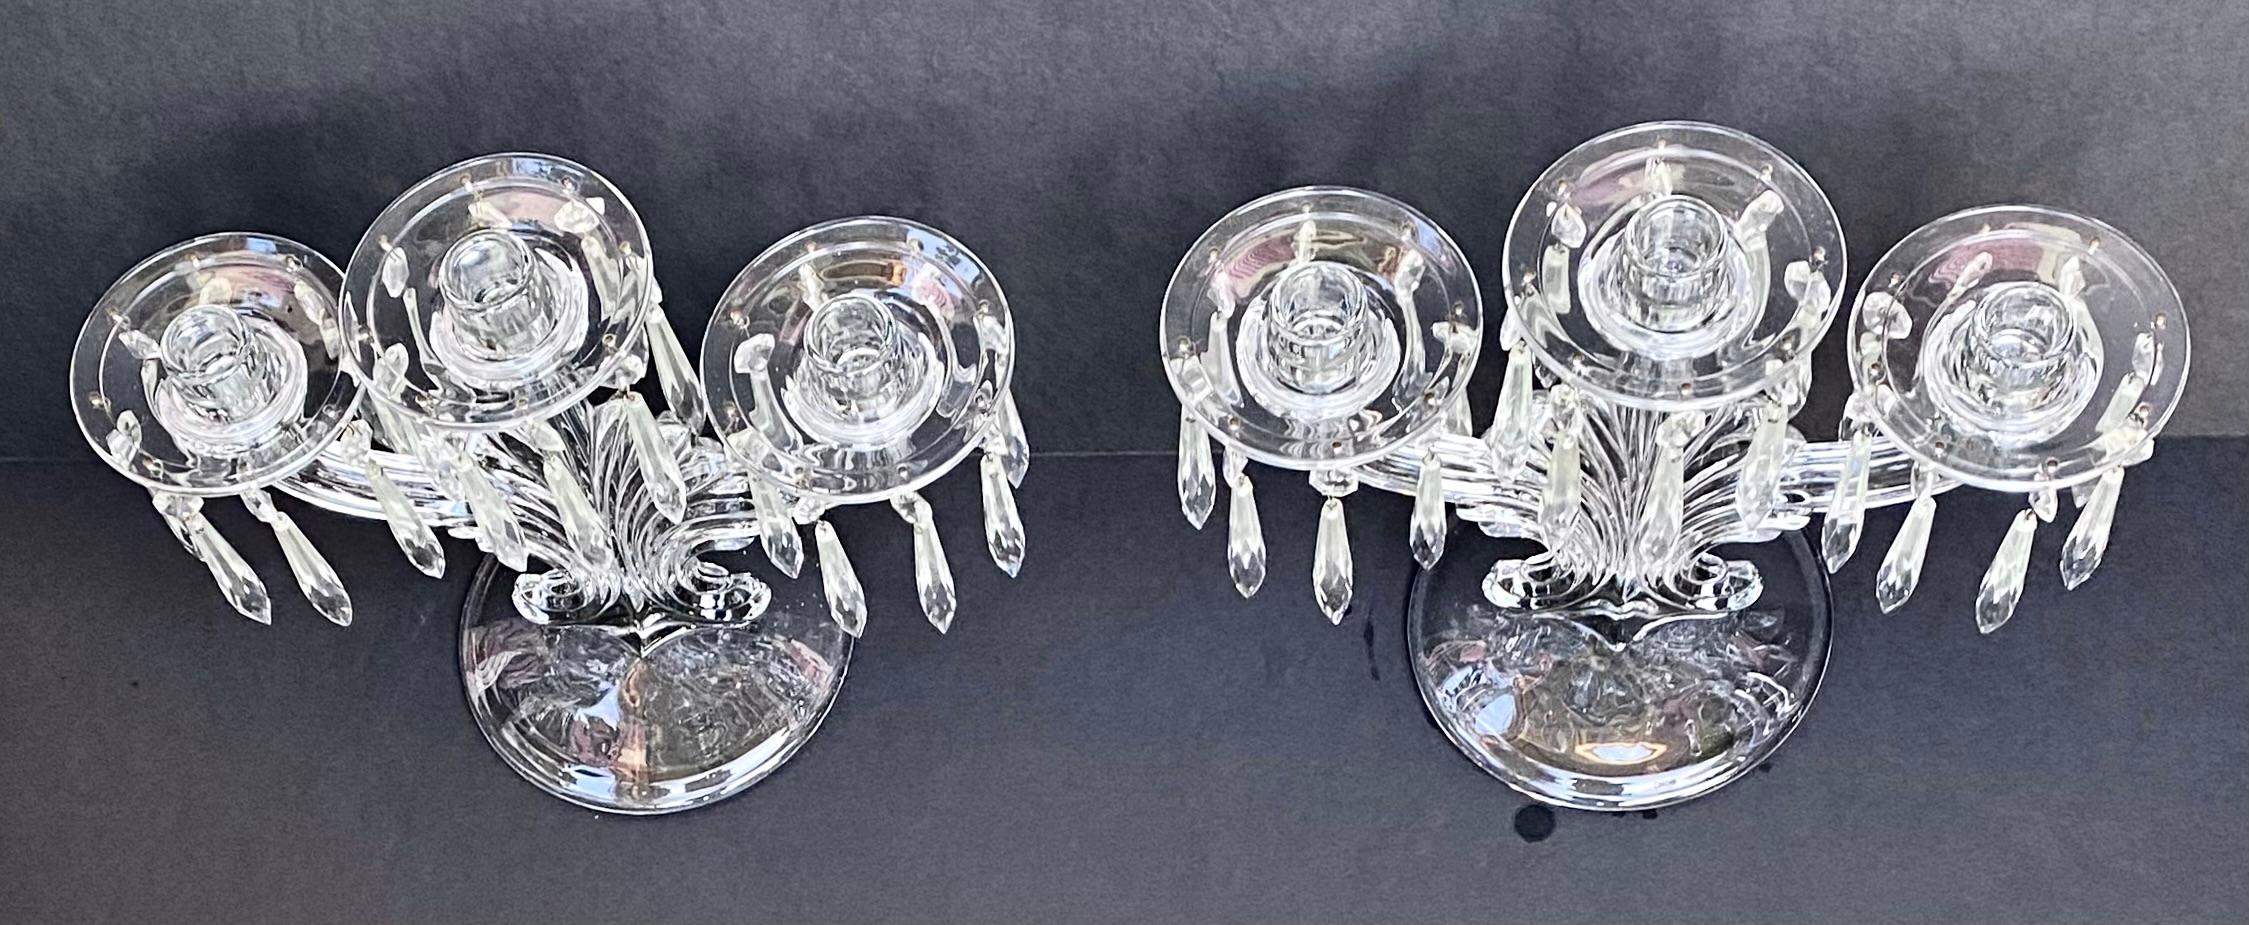 Pair of American Pressed Glass Three Light Candelabra, Early 20th C., on Swirled For Sale 7